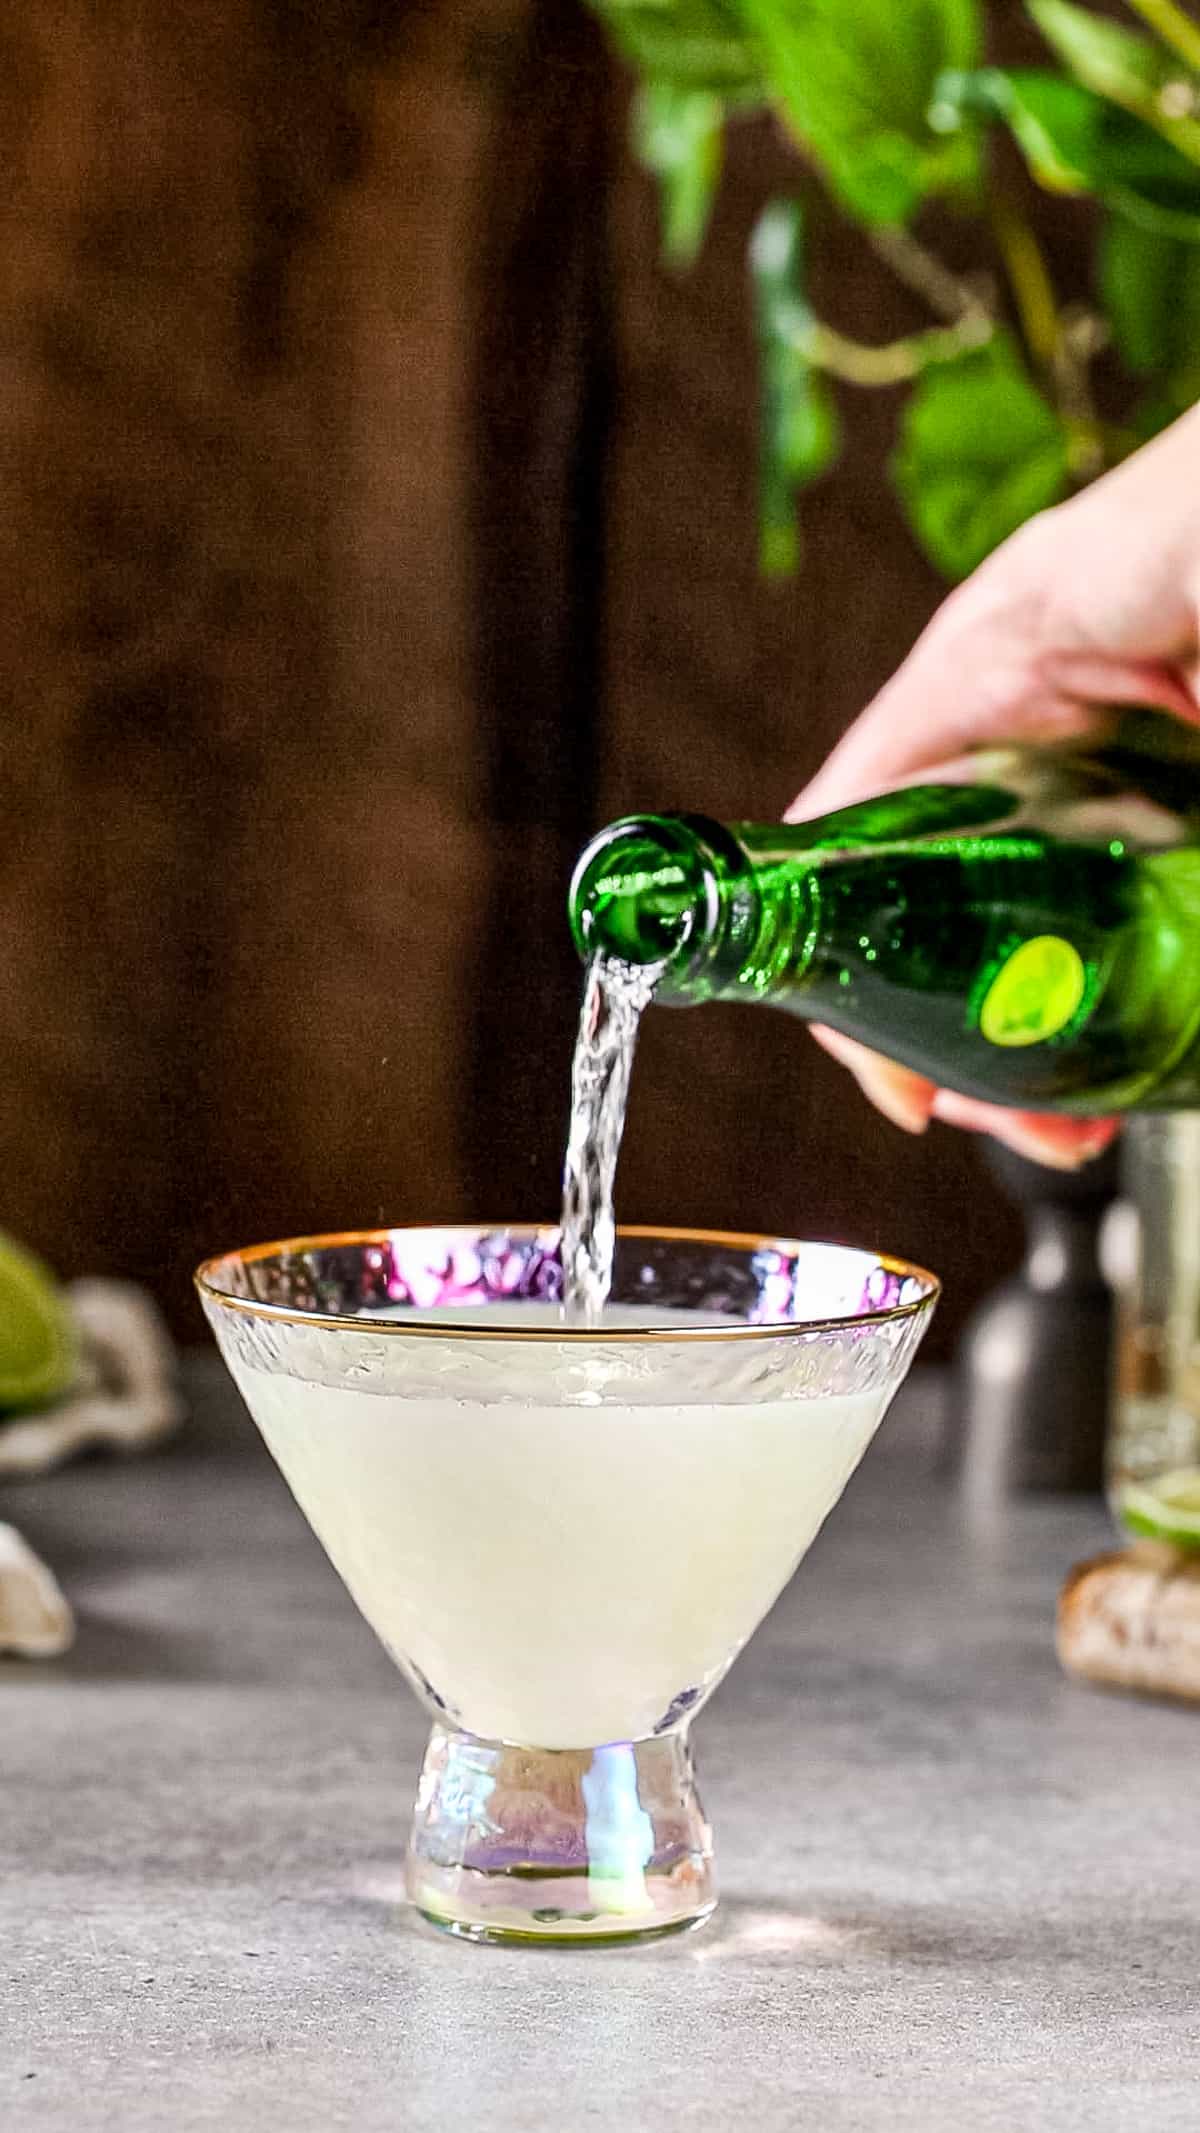 Hand pouring sparkling water into a martini glass filled with liquid.